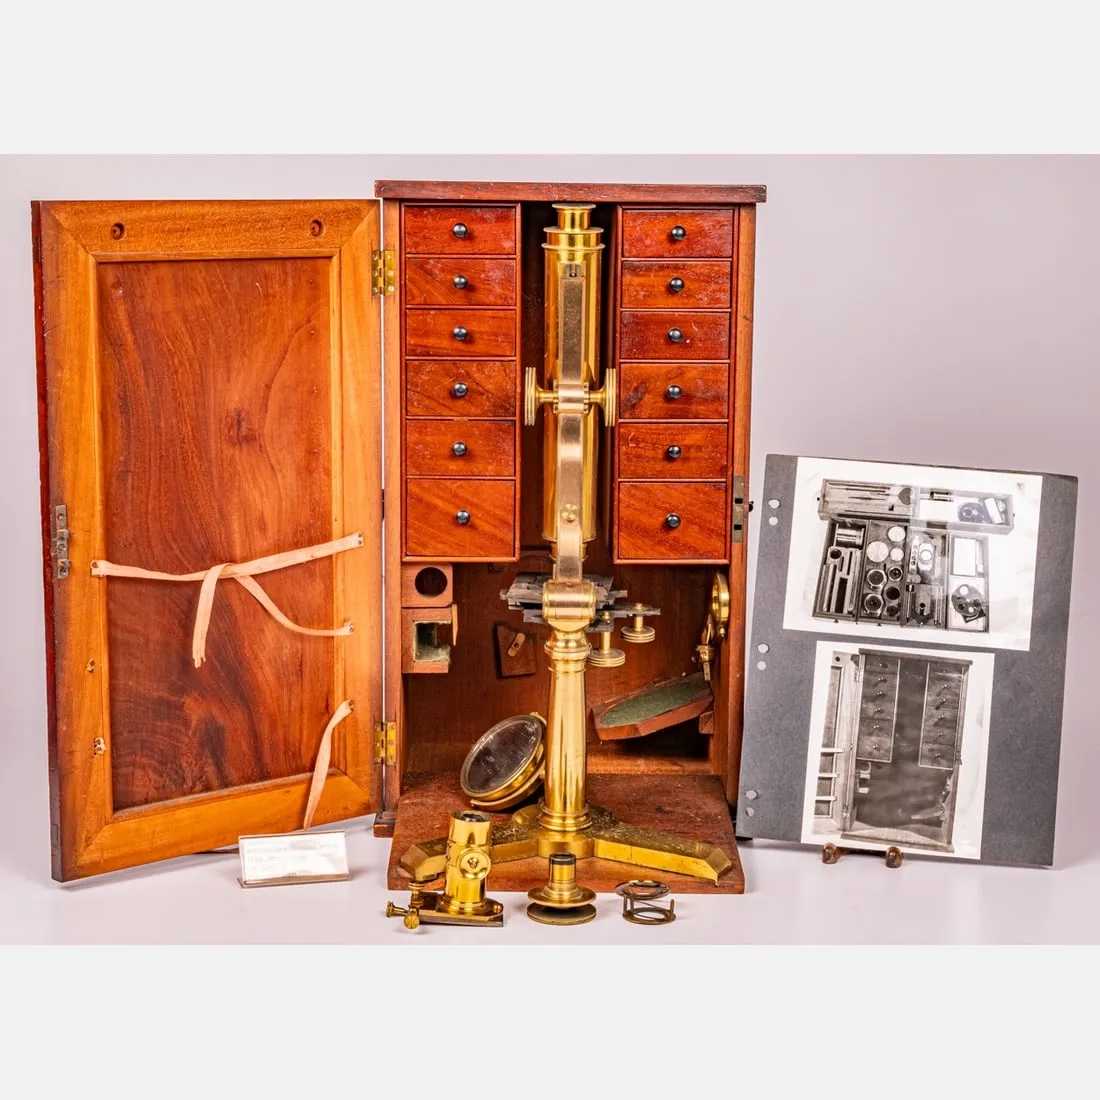 James Smith Compound Monocular 1st Class Microscope, estimated at $3,000-$5,000 at Gray's.